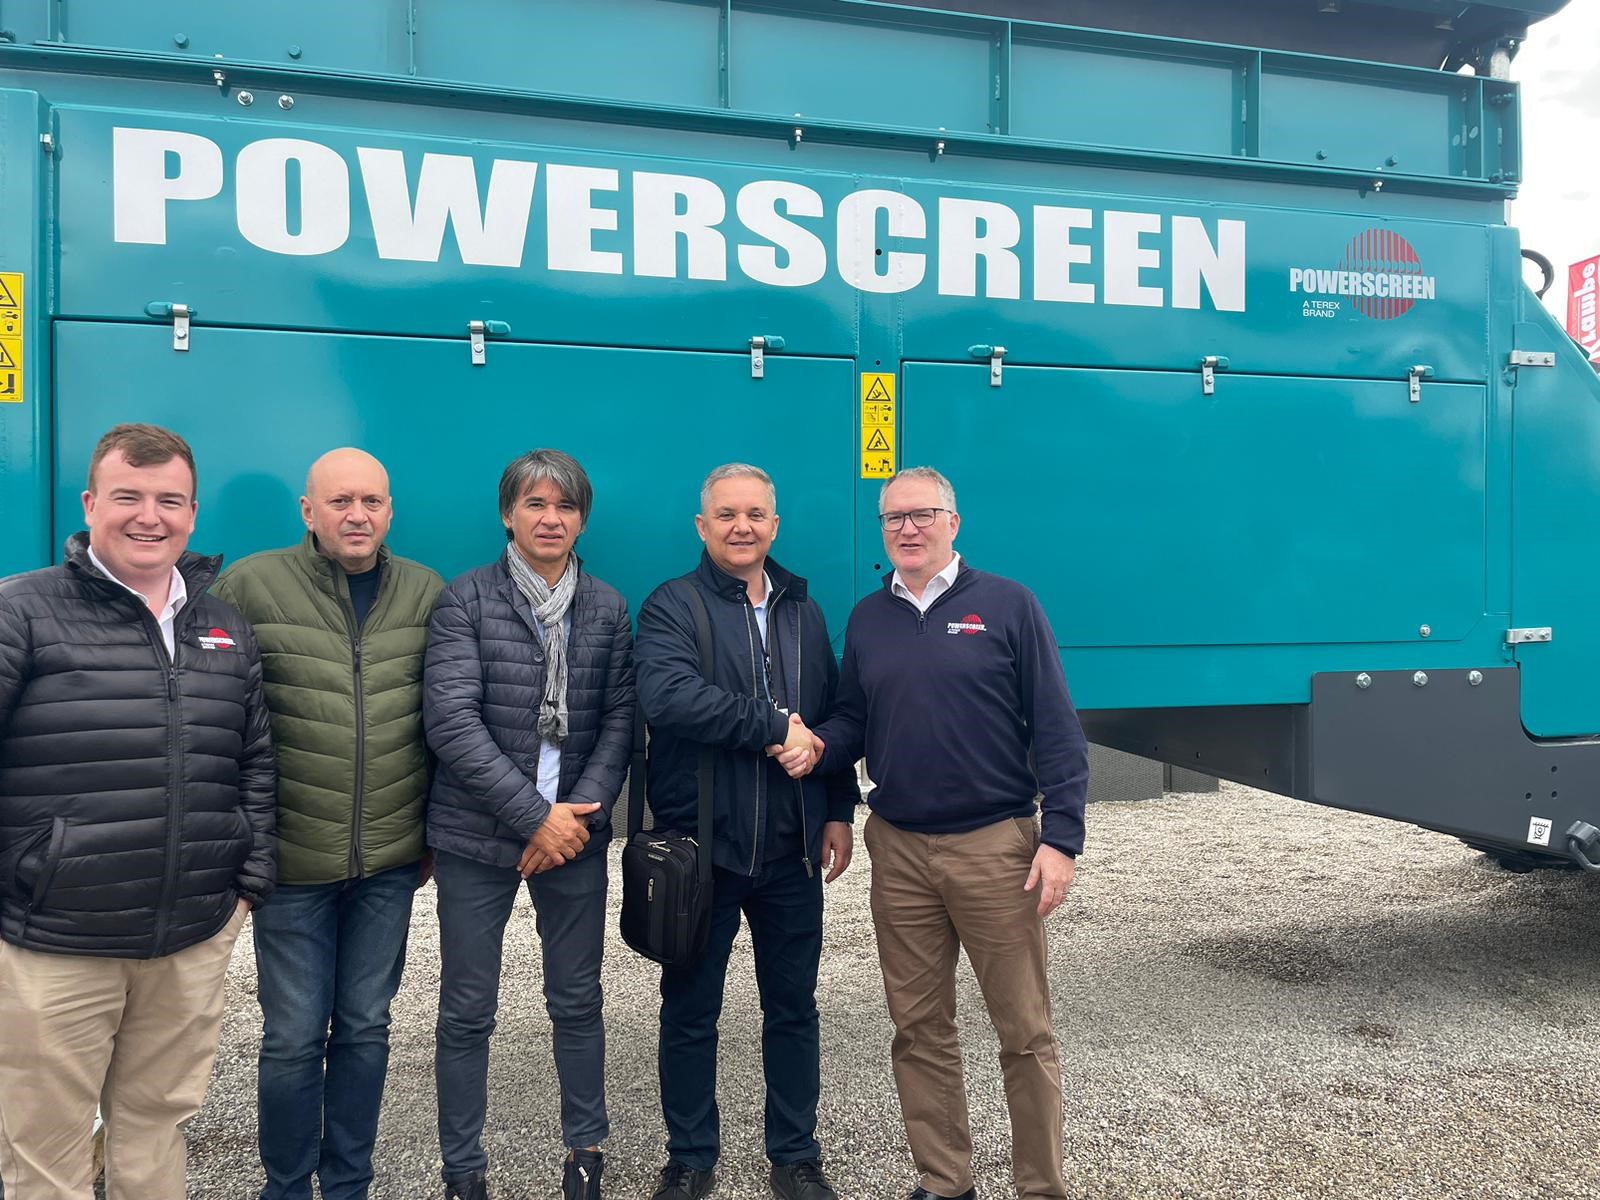 Powerscreen says IRCAT is the right strategic partner to support its ambitious growth objectives in Romania